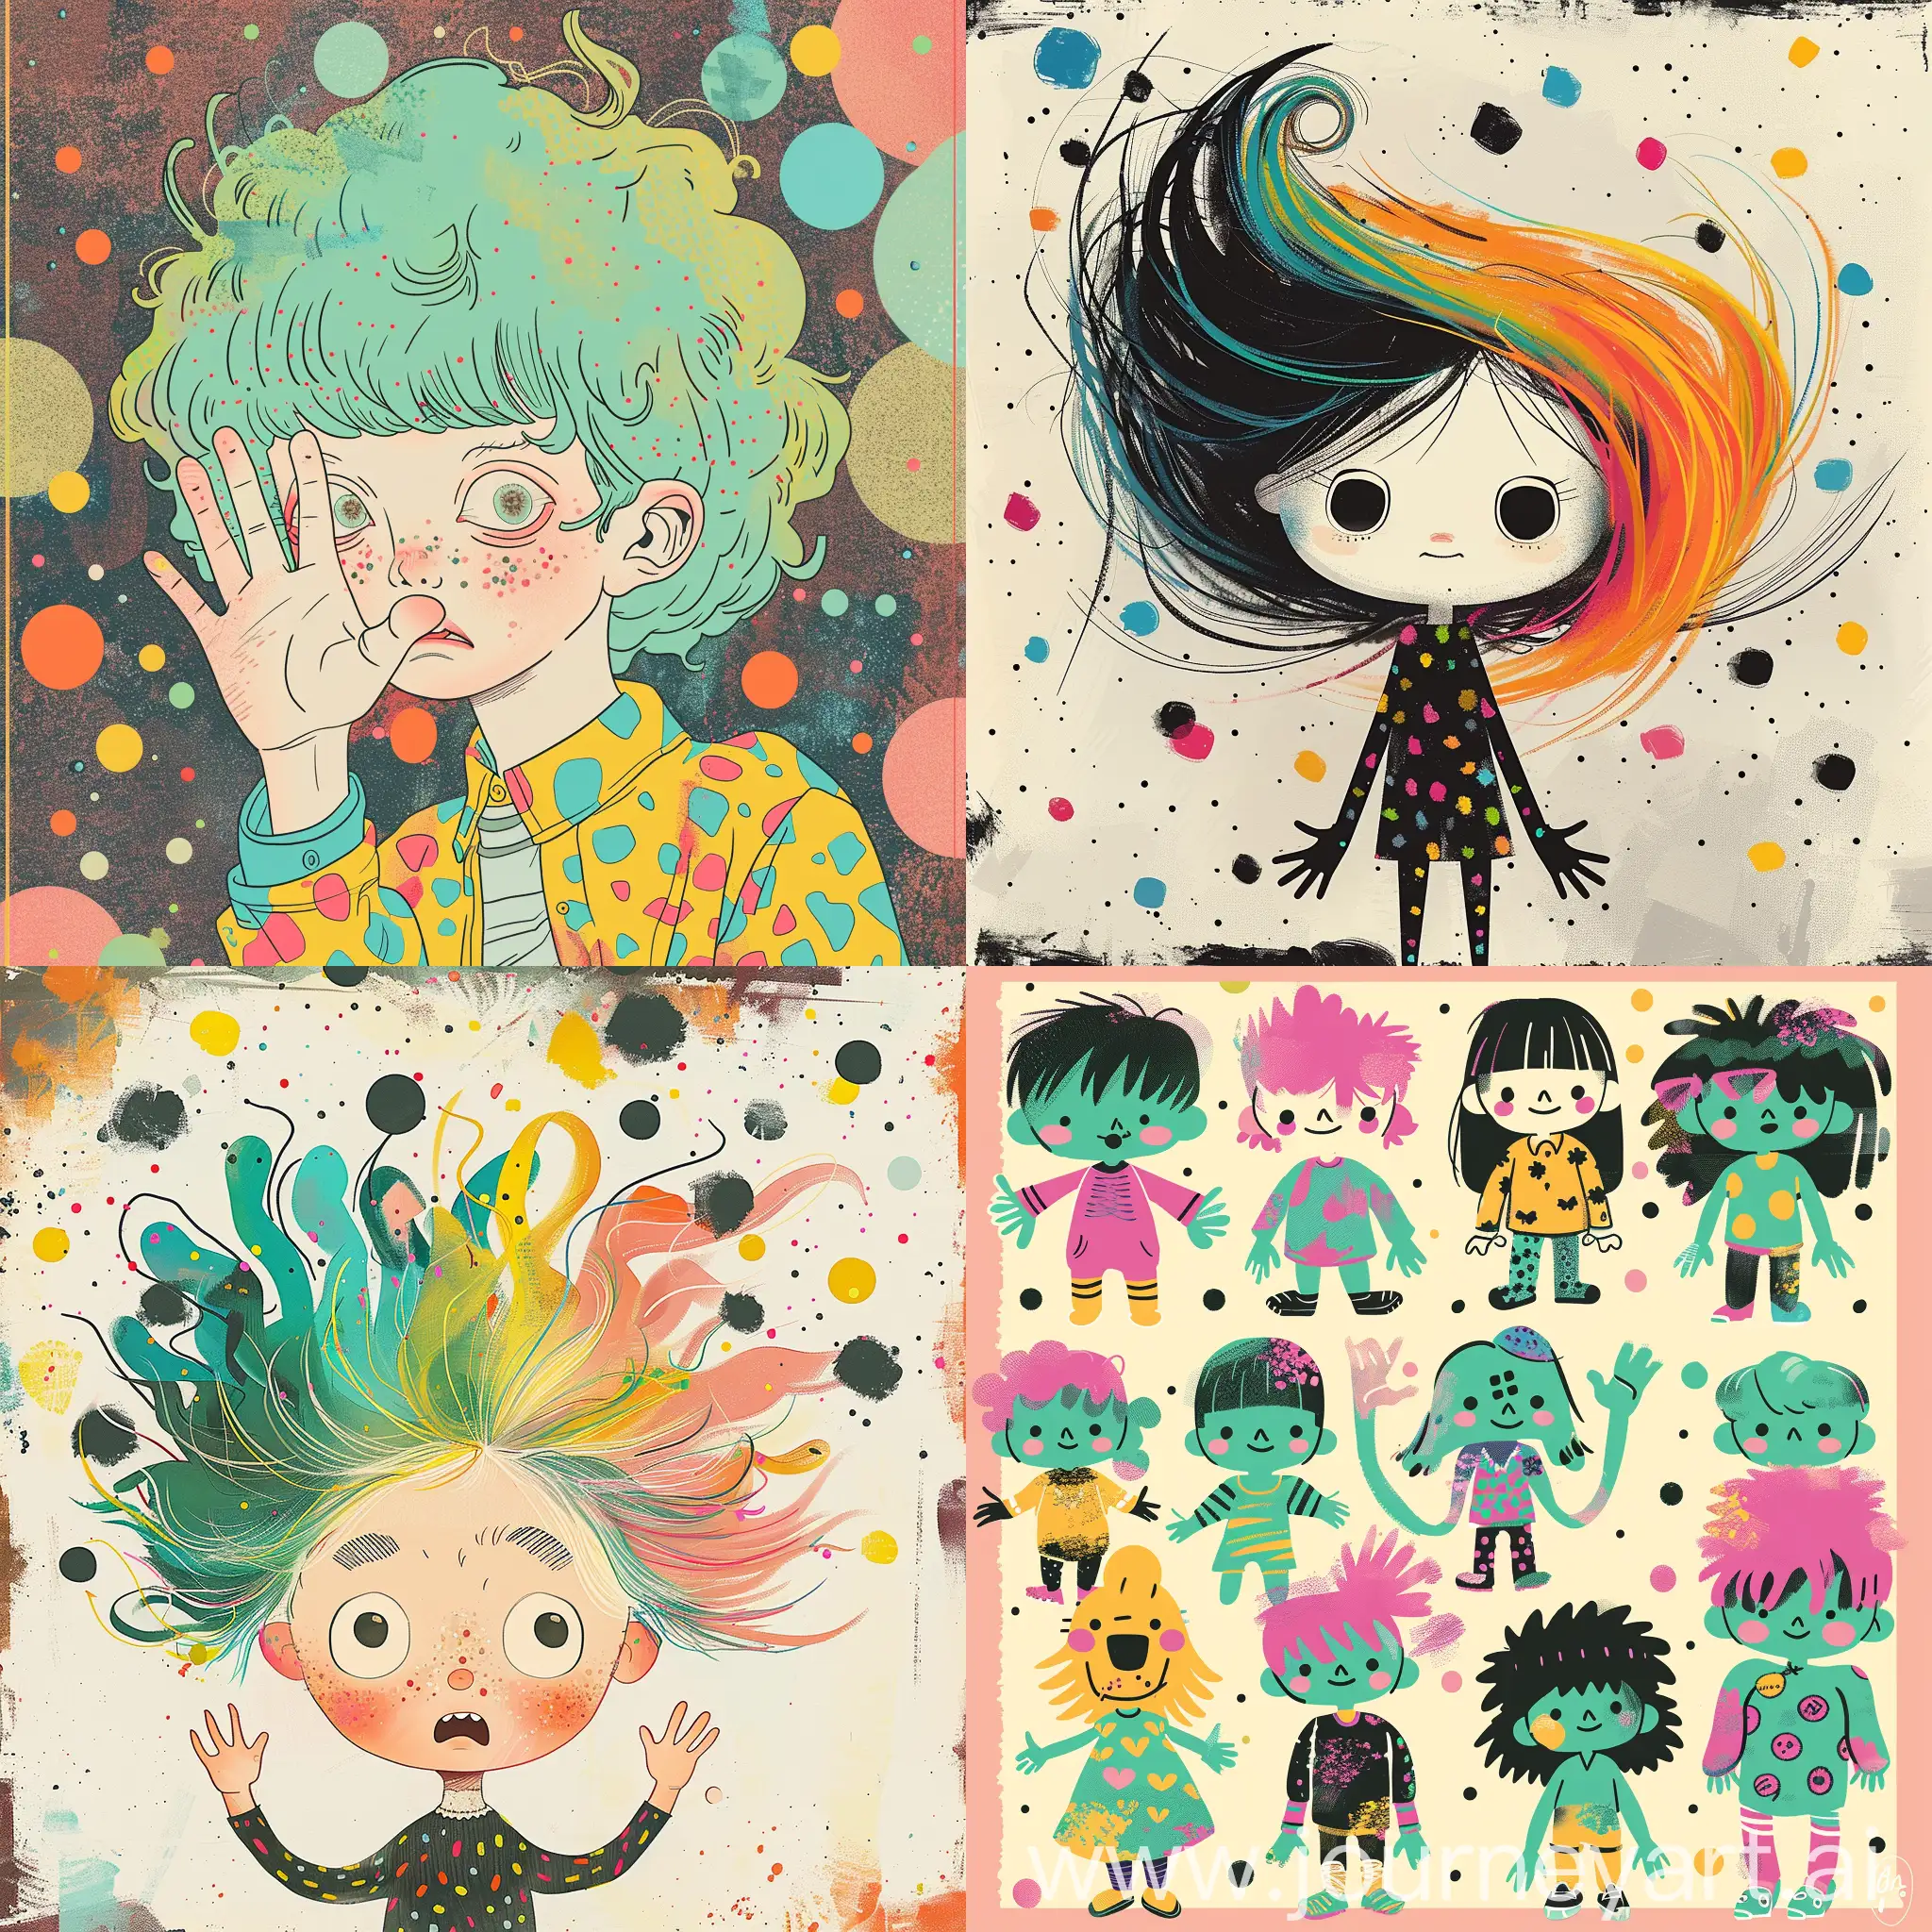 Colorful-Pastel-Goth-Children-Illustration-with-Playful-Character-Design